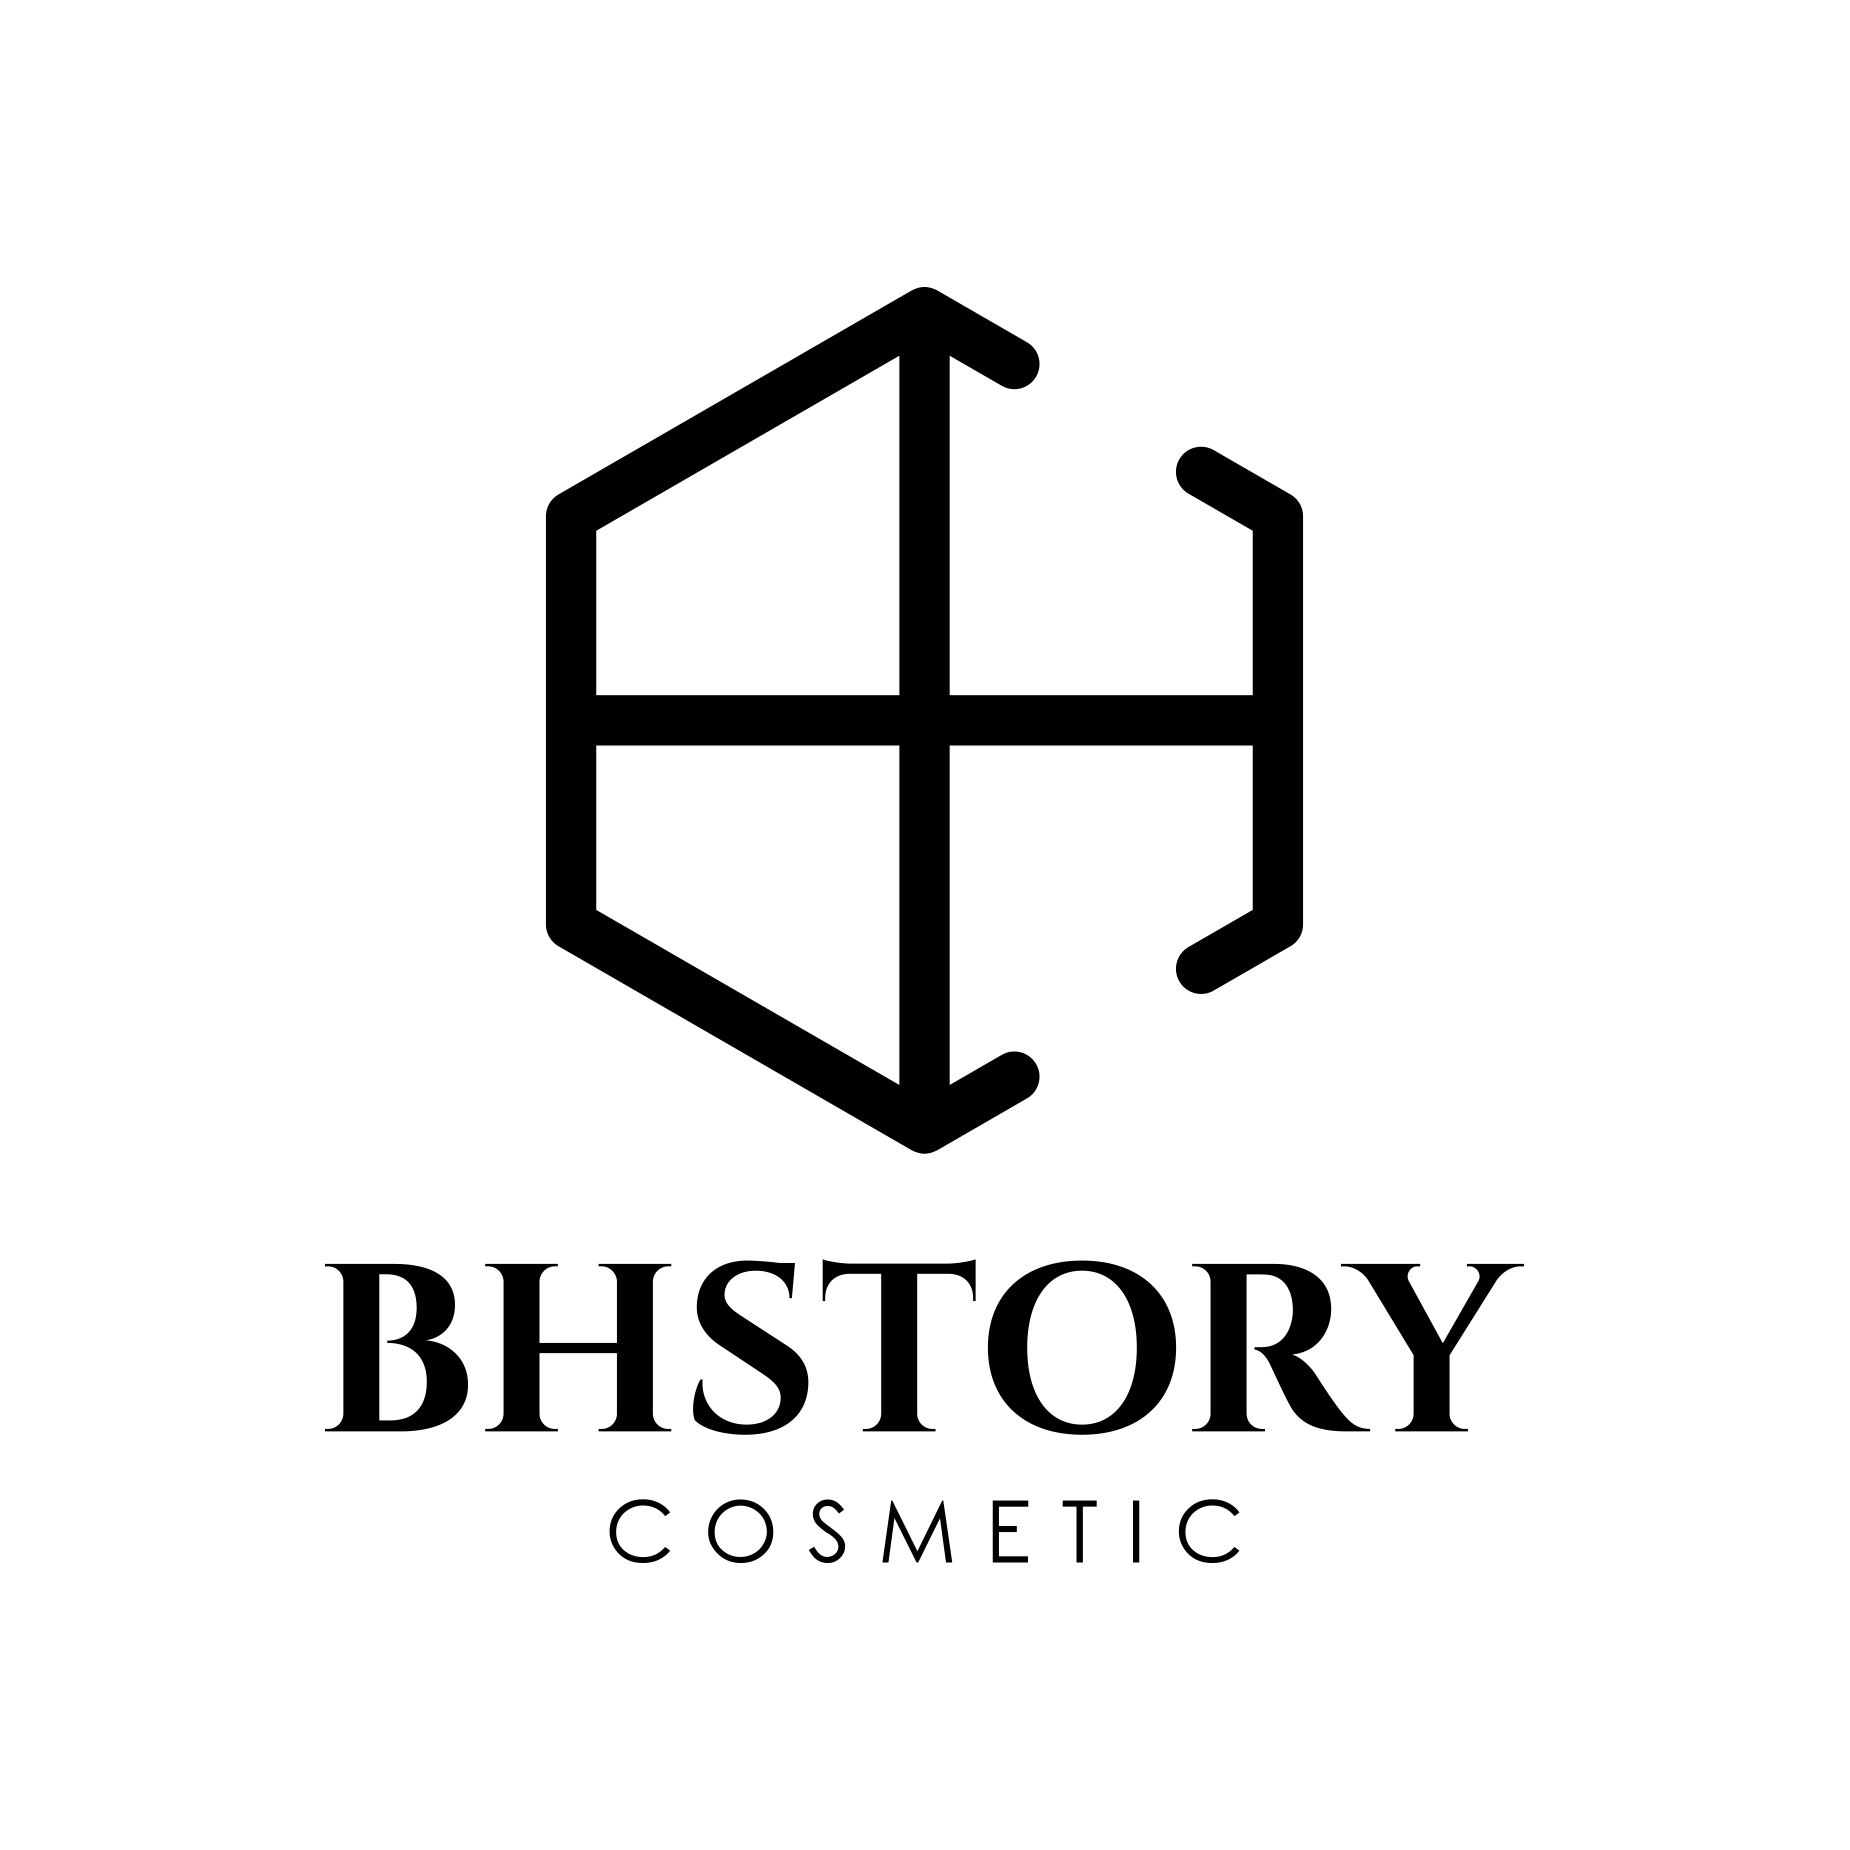 BH Story Cosmetic Co., Ltd.